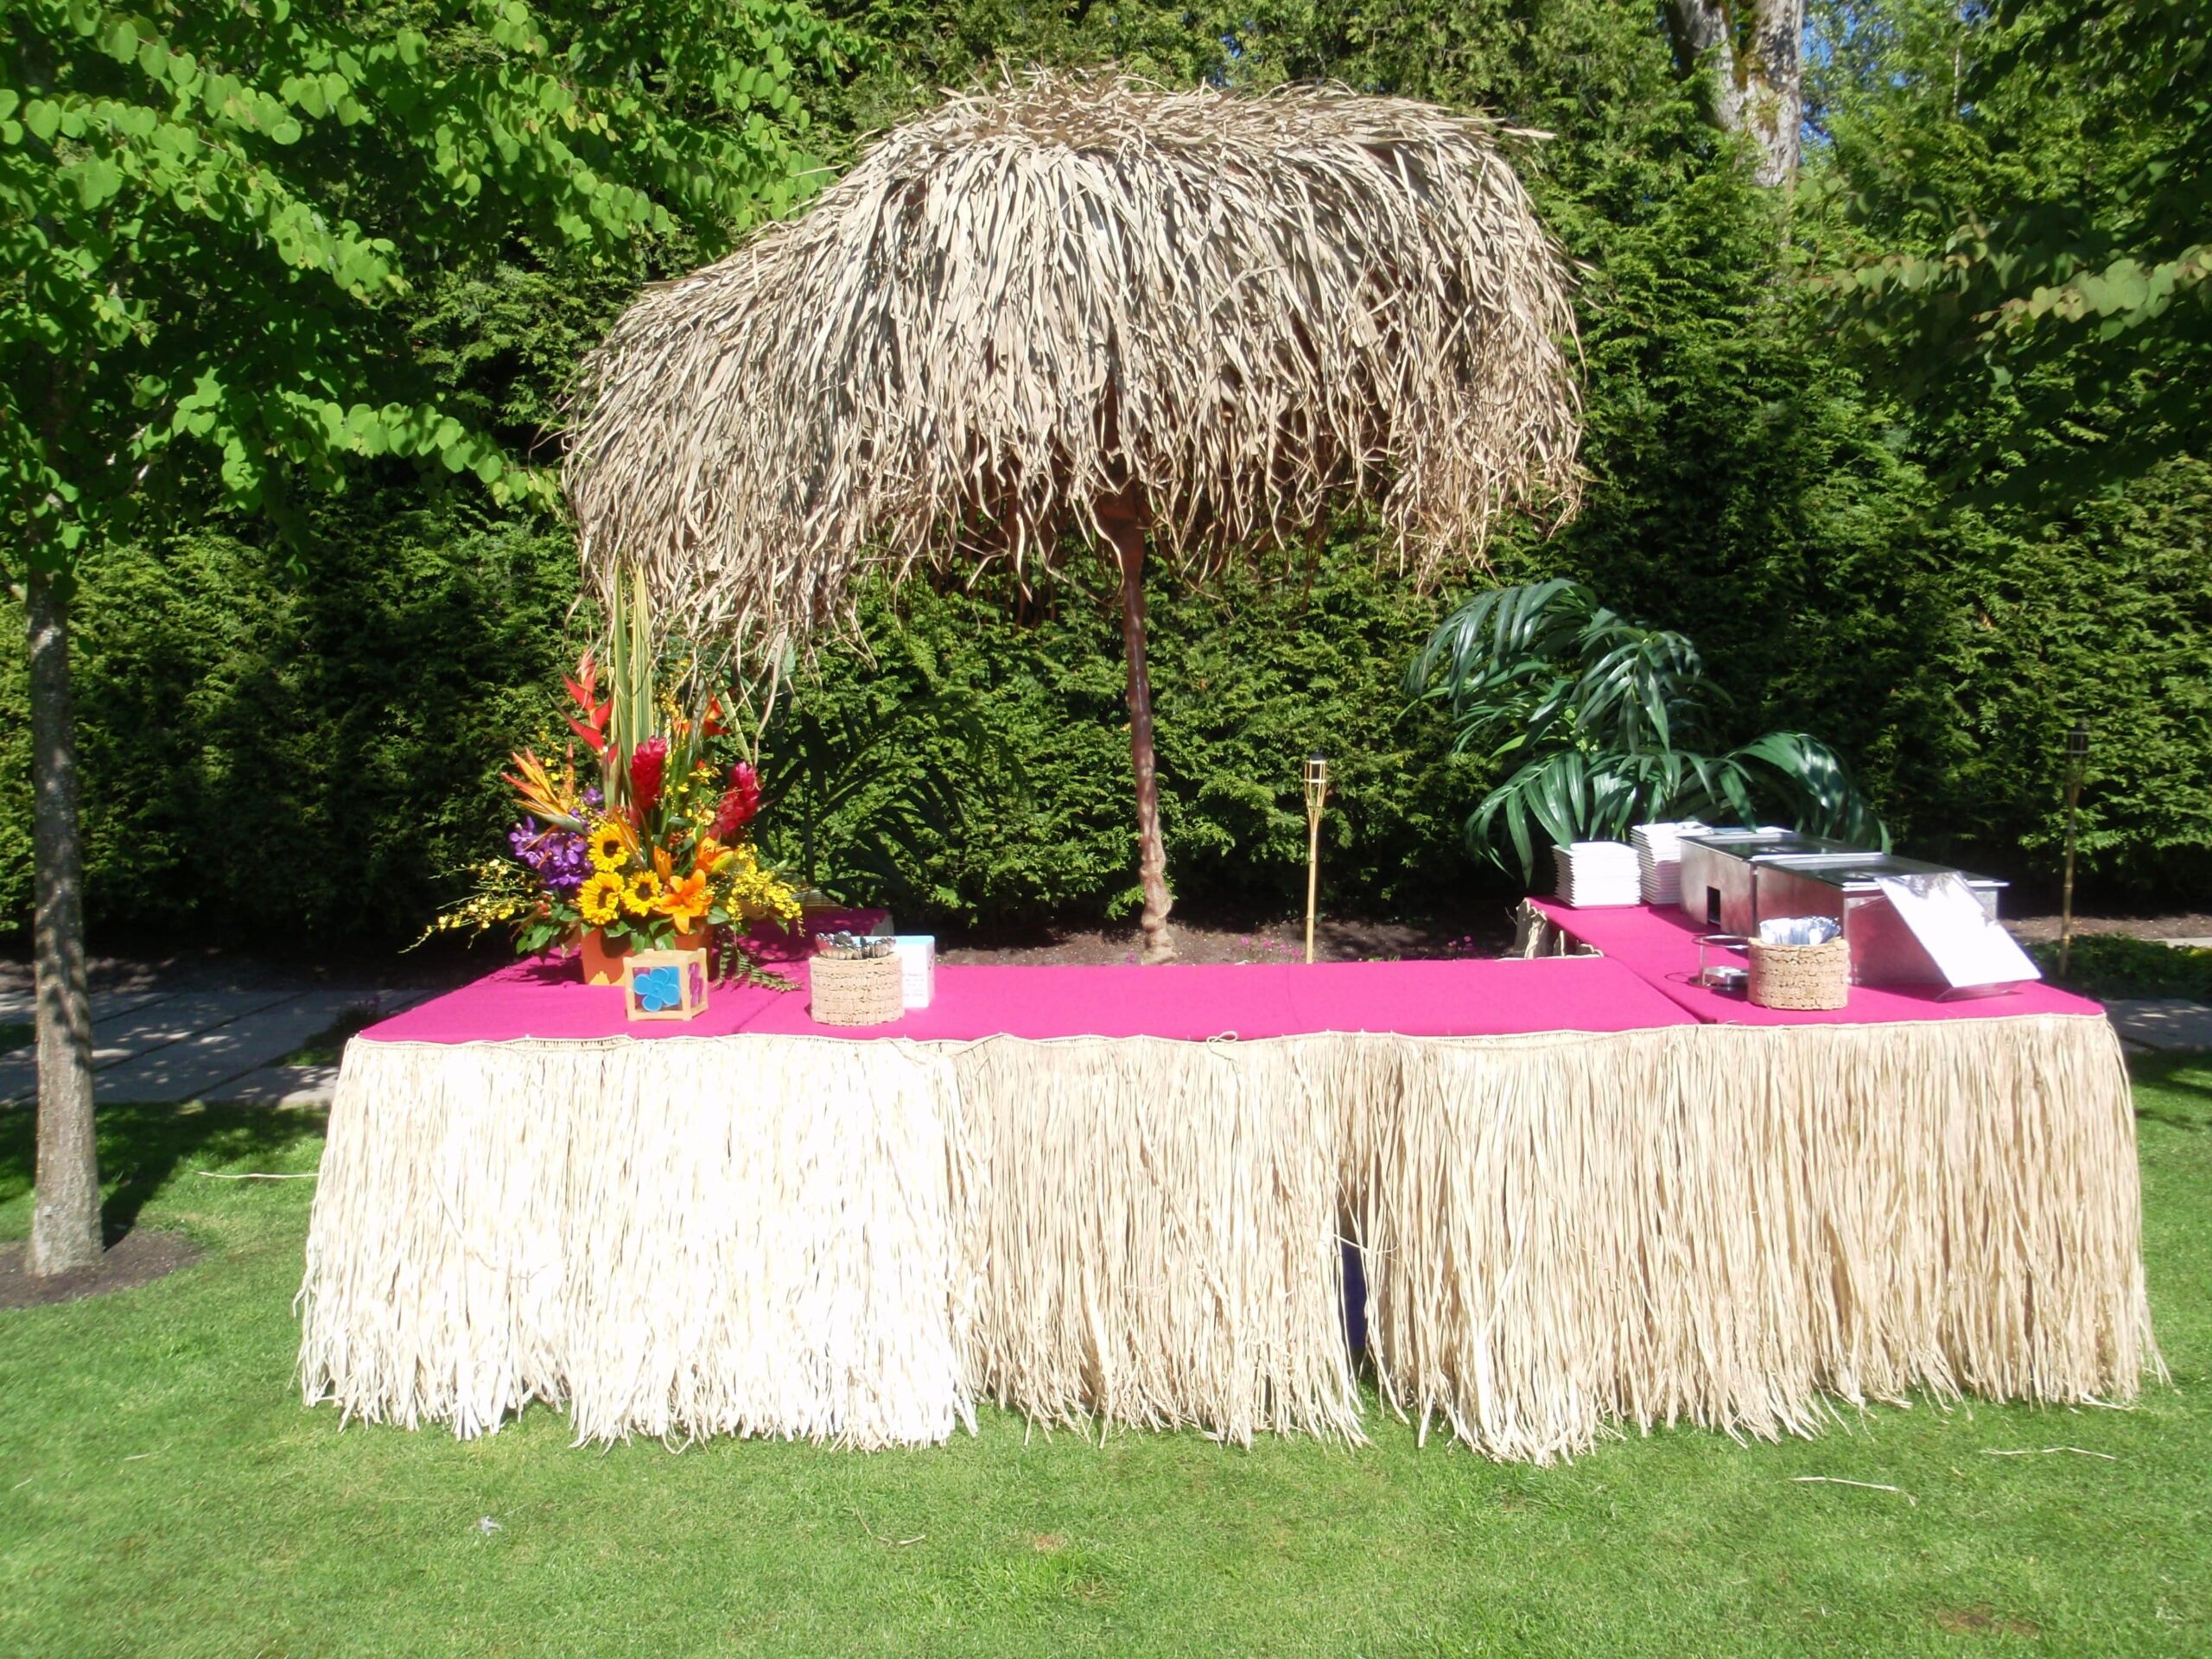 Tiki hut at tropical themed office summer party